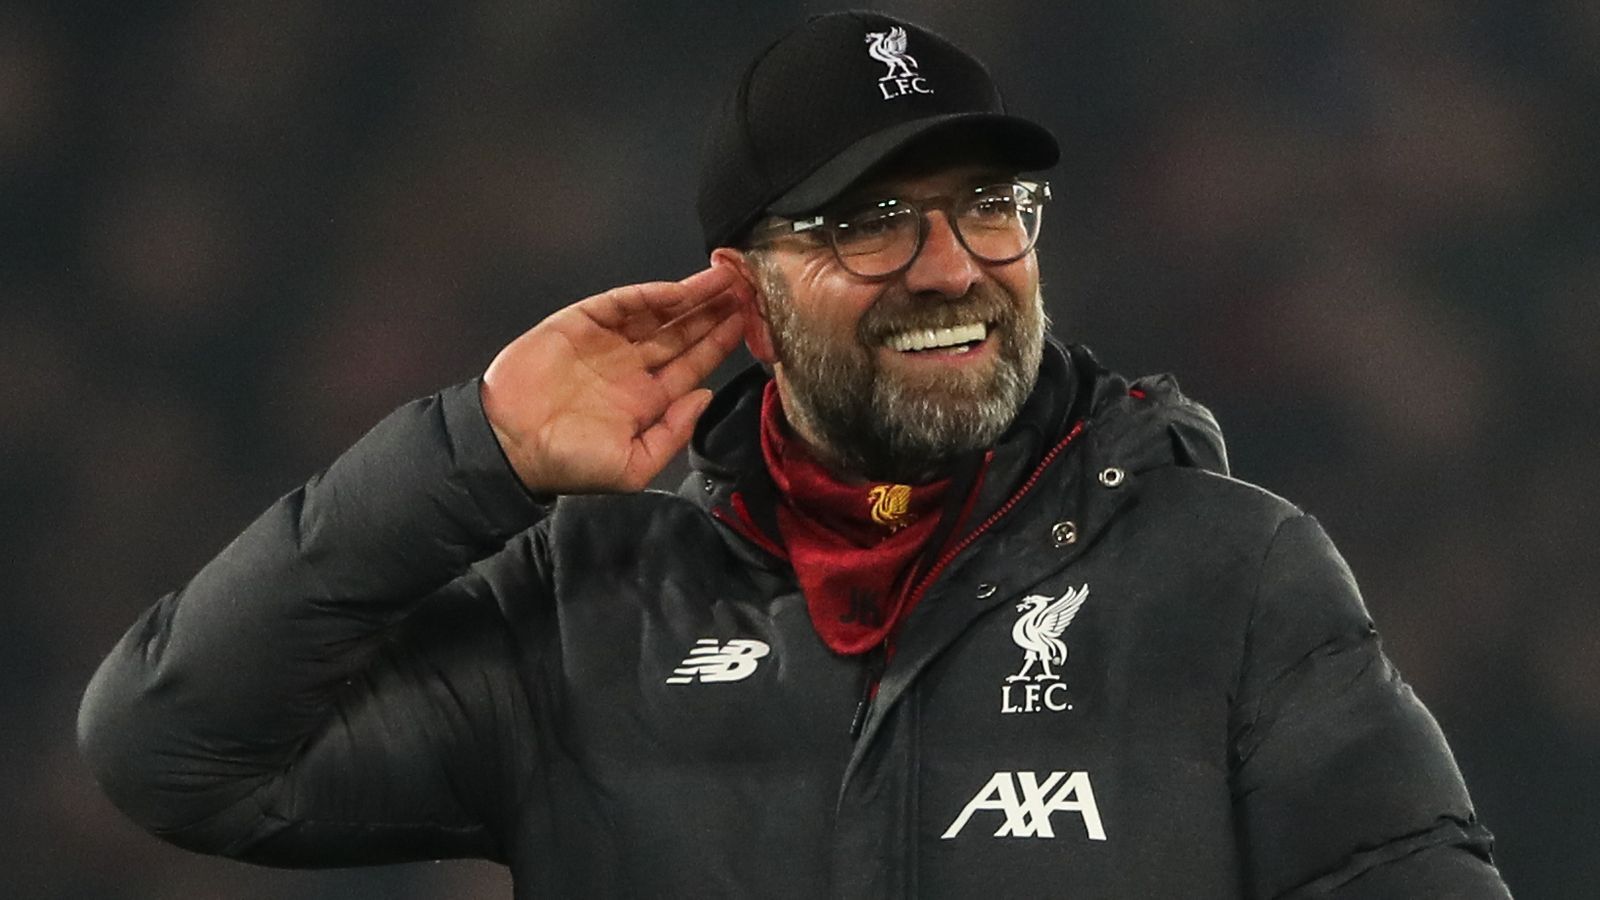 Klopp proposed organizing a championship parade for the Premier League